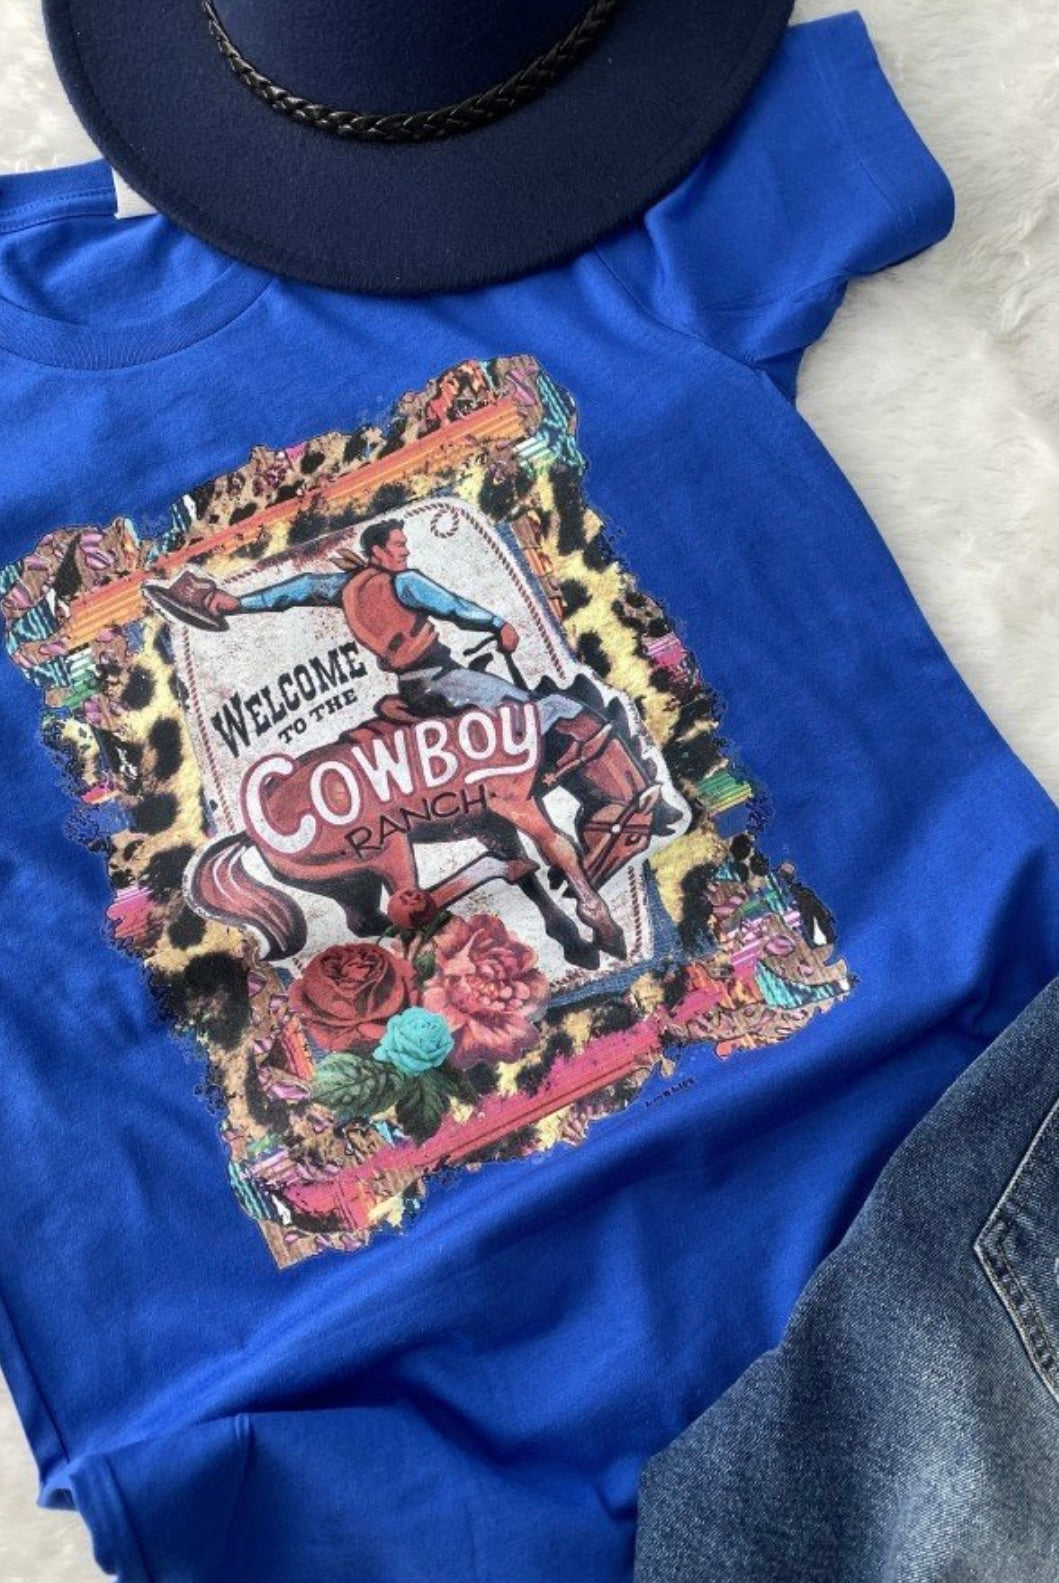 Welcome to cowboy ranch tee